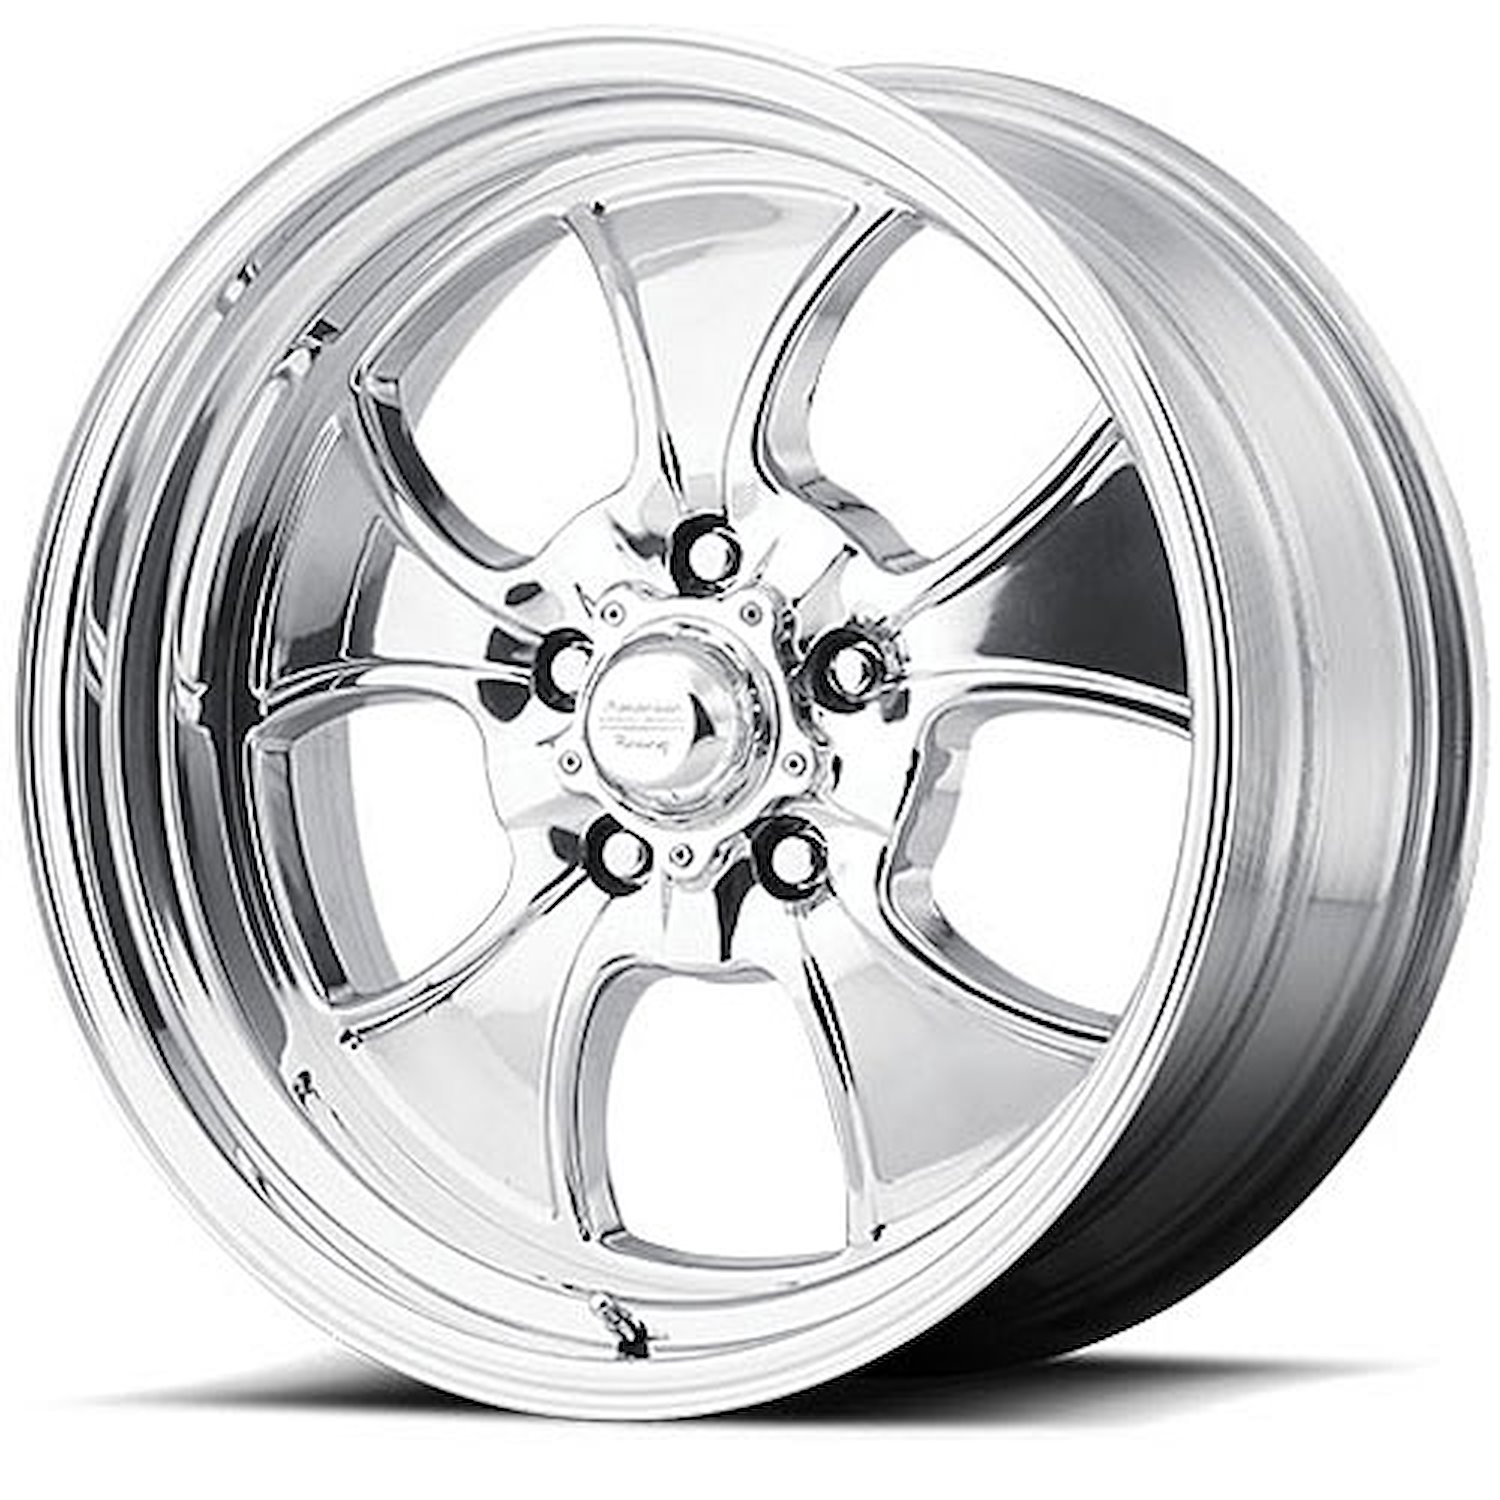 VN550 Series Hopsters Wheel Size: 15" x 10"